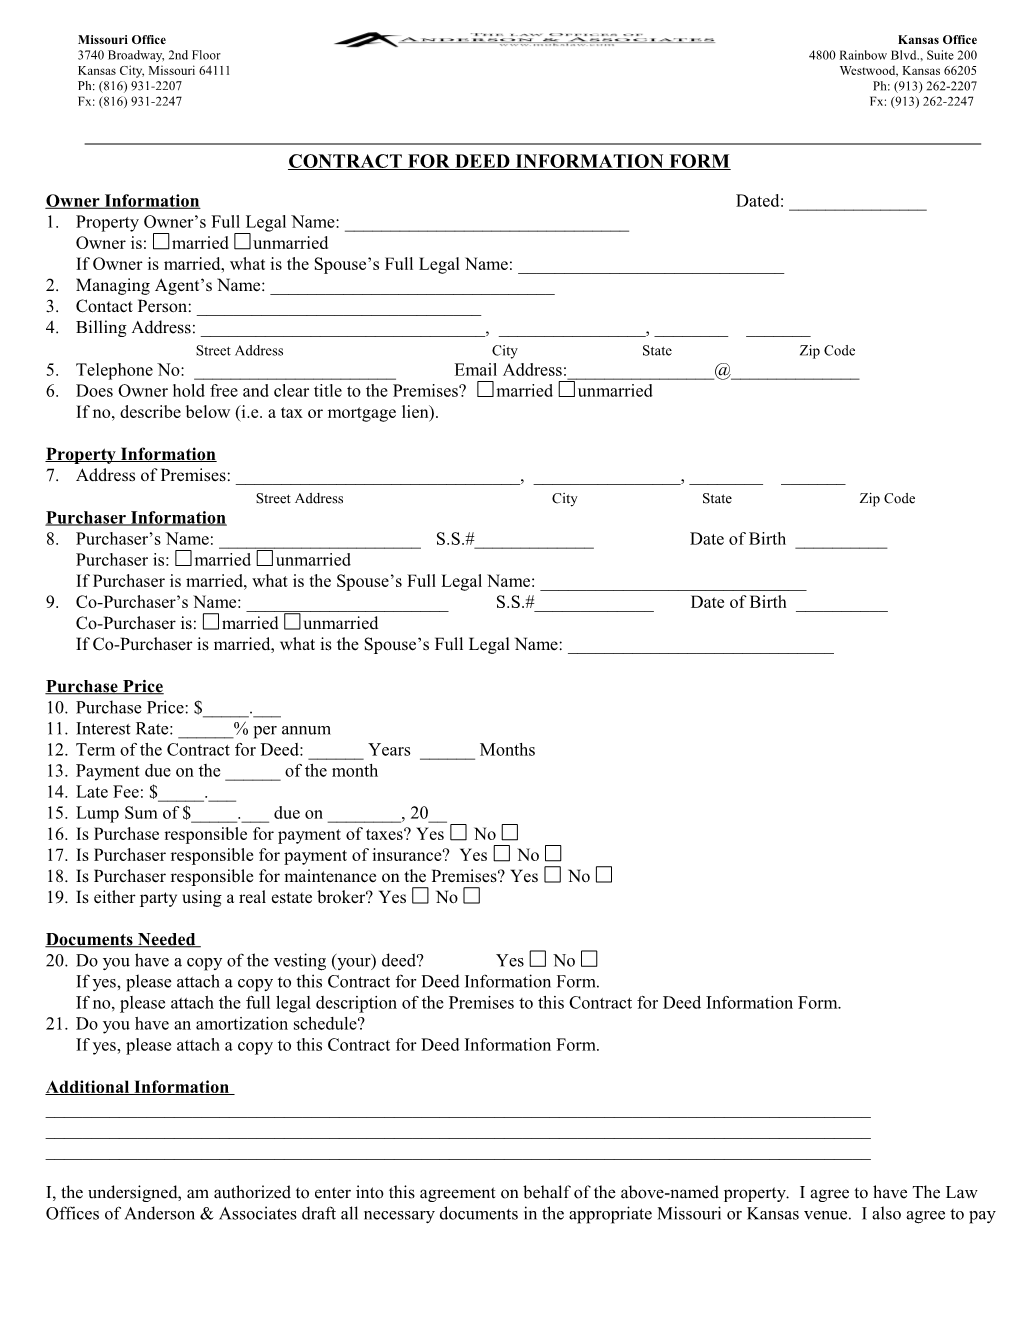 Contract for Deed Information Form